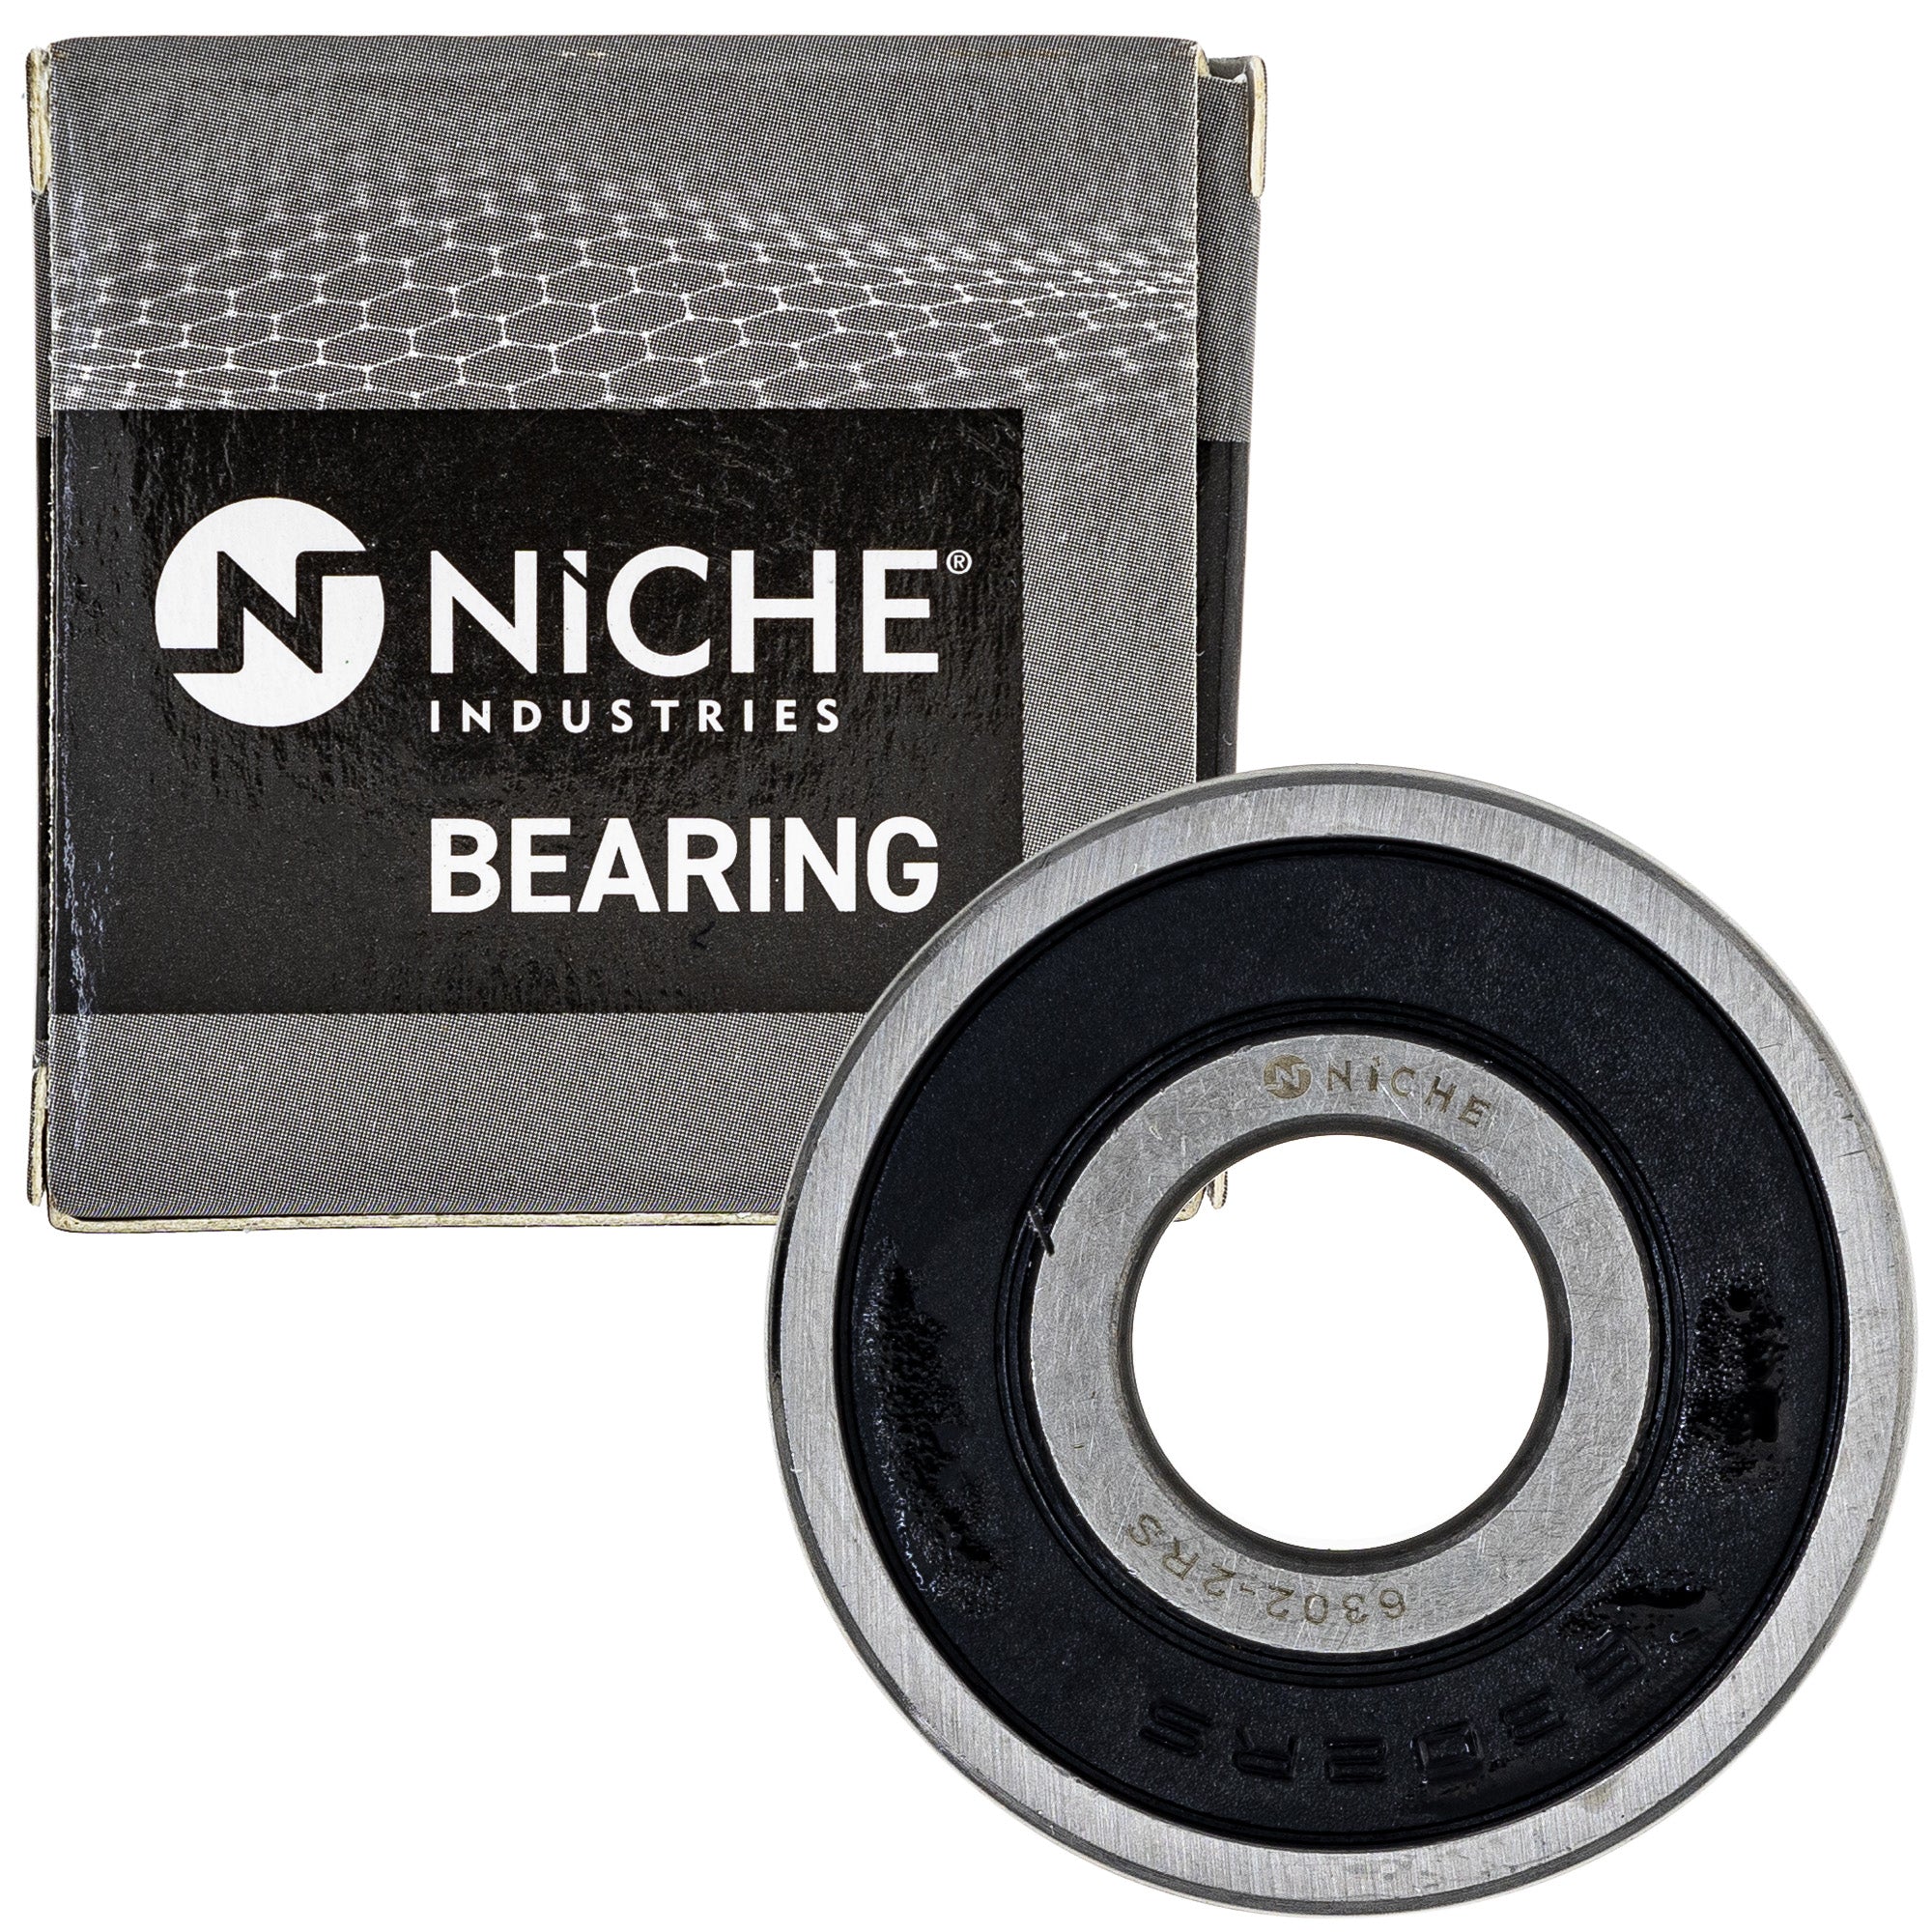 NICHE MK1009148 Wheel Bearing Seal Kit for zOTHER XR200 XL185S